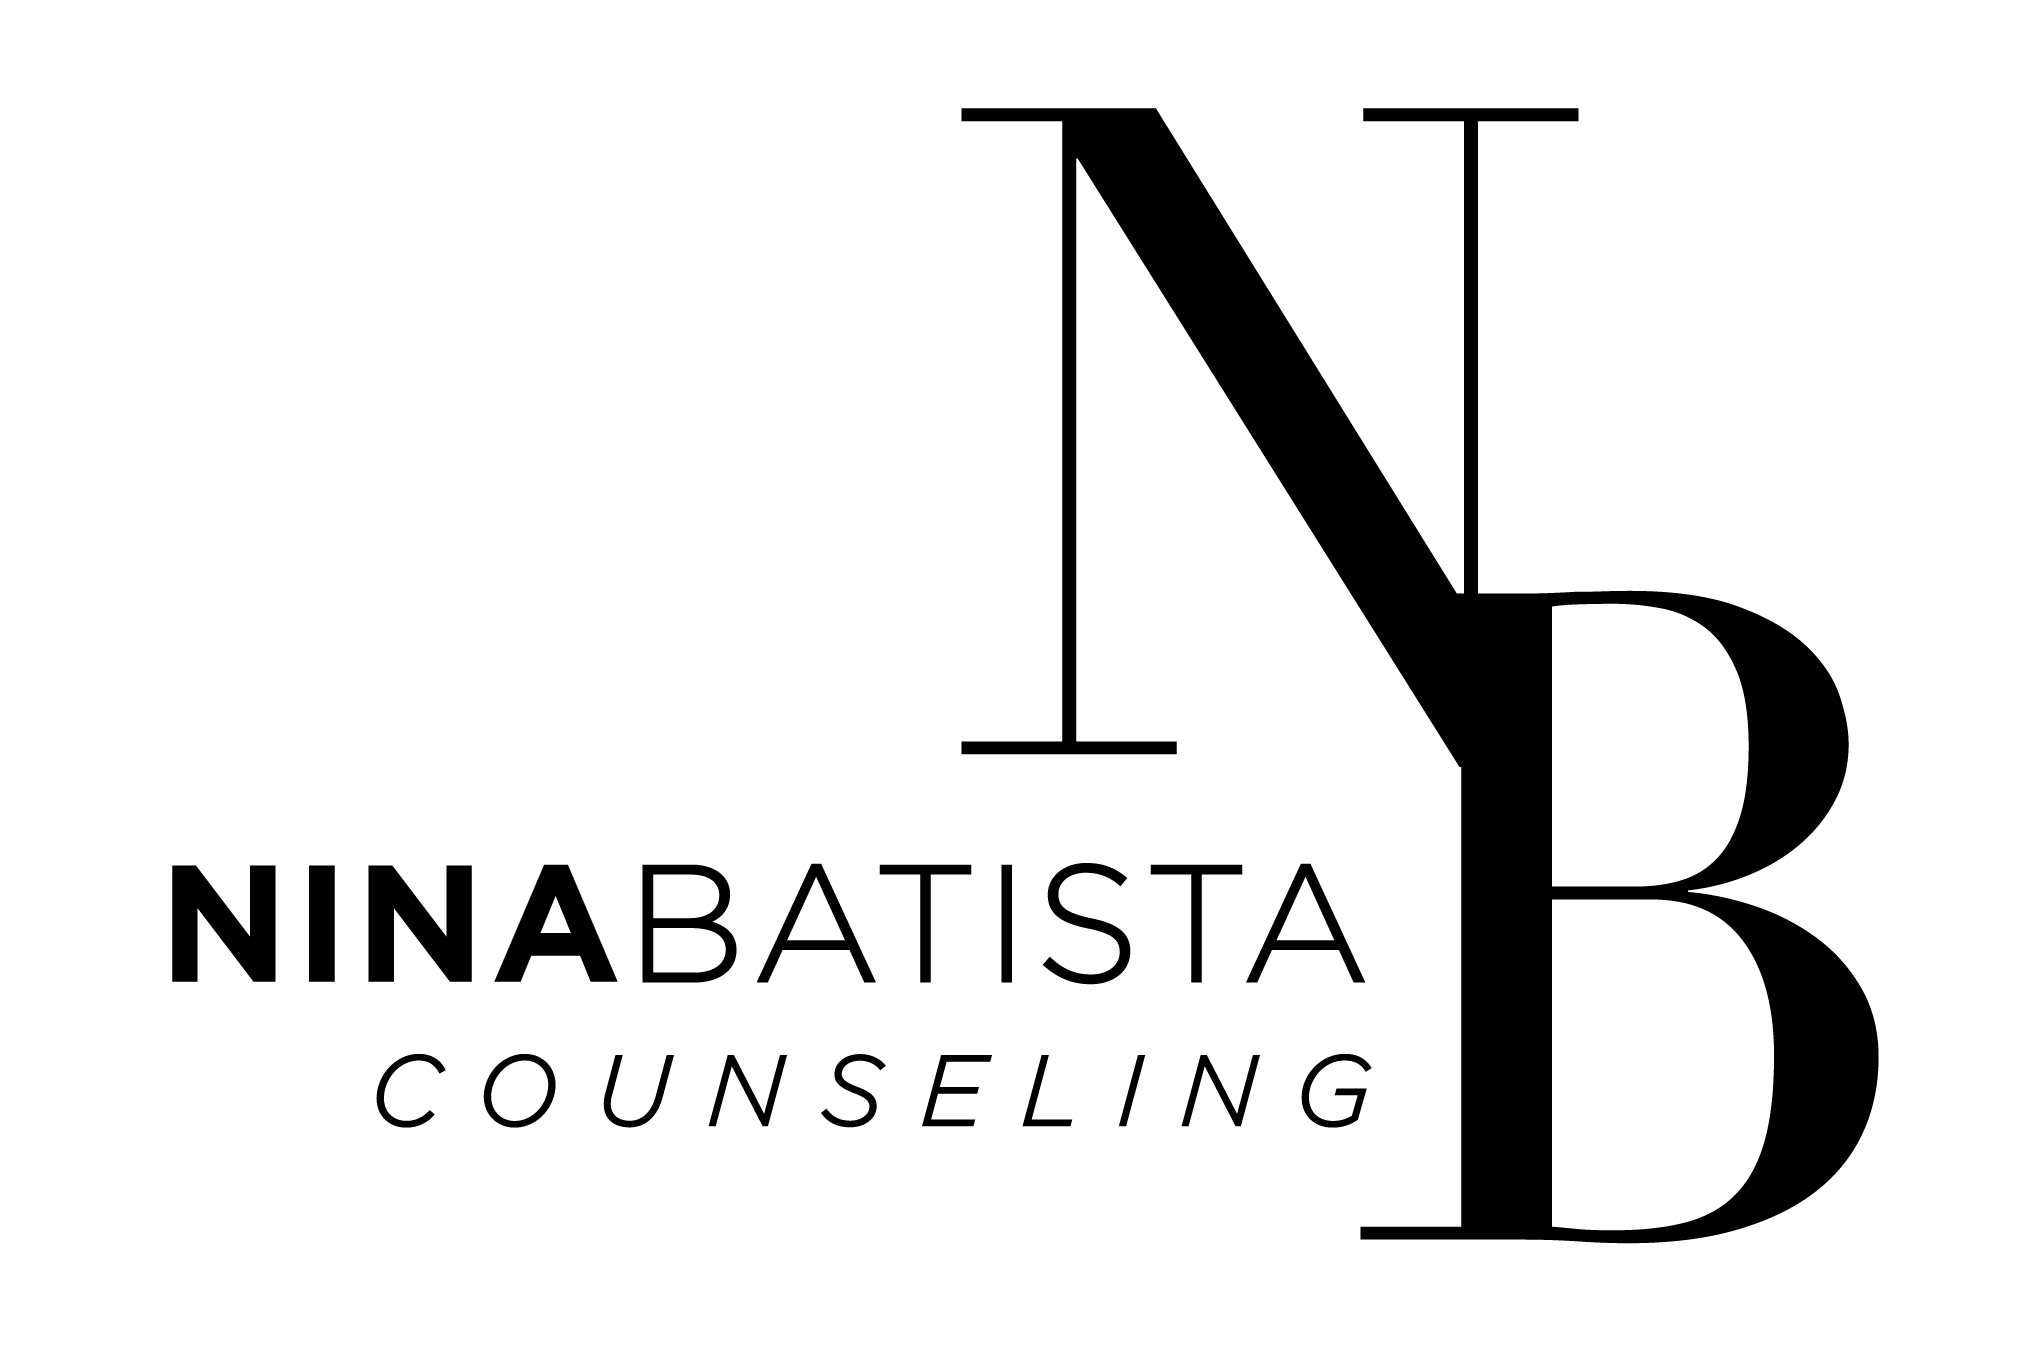 Nina Batista Counseling Continues to Drum Hope and Support for Victims of Narc Abuse, Relationship Traumas, and Other Behavioral Concerns